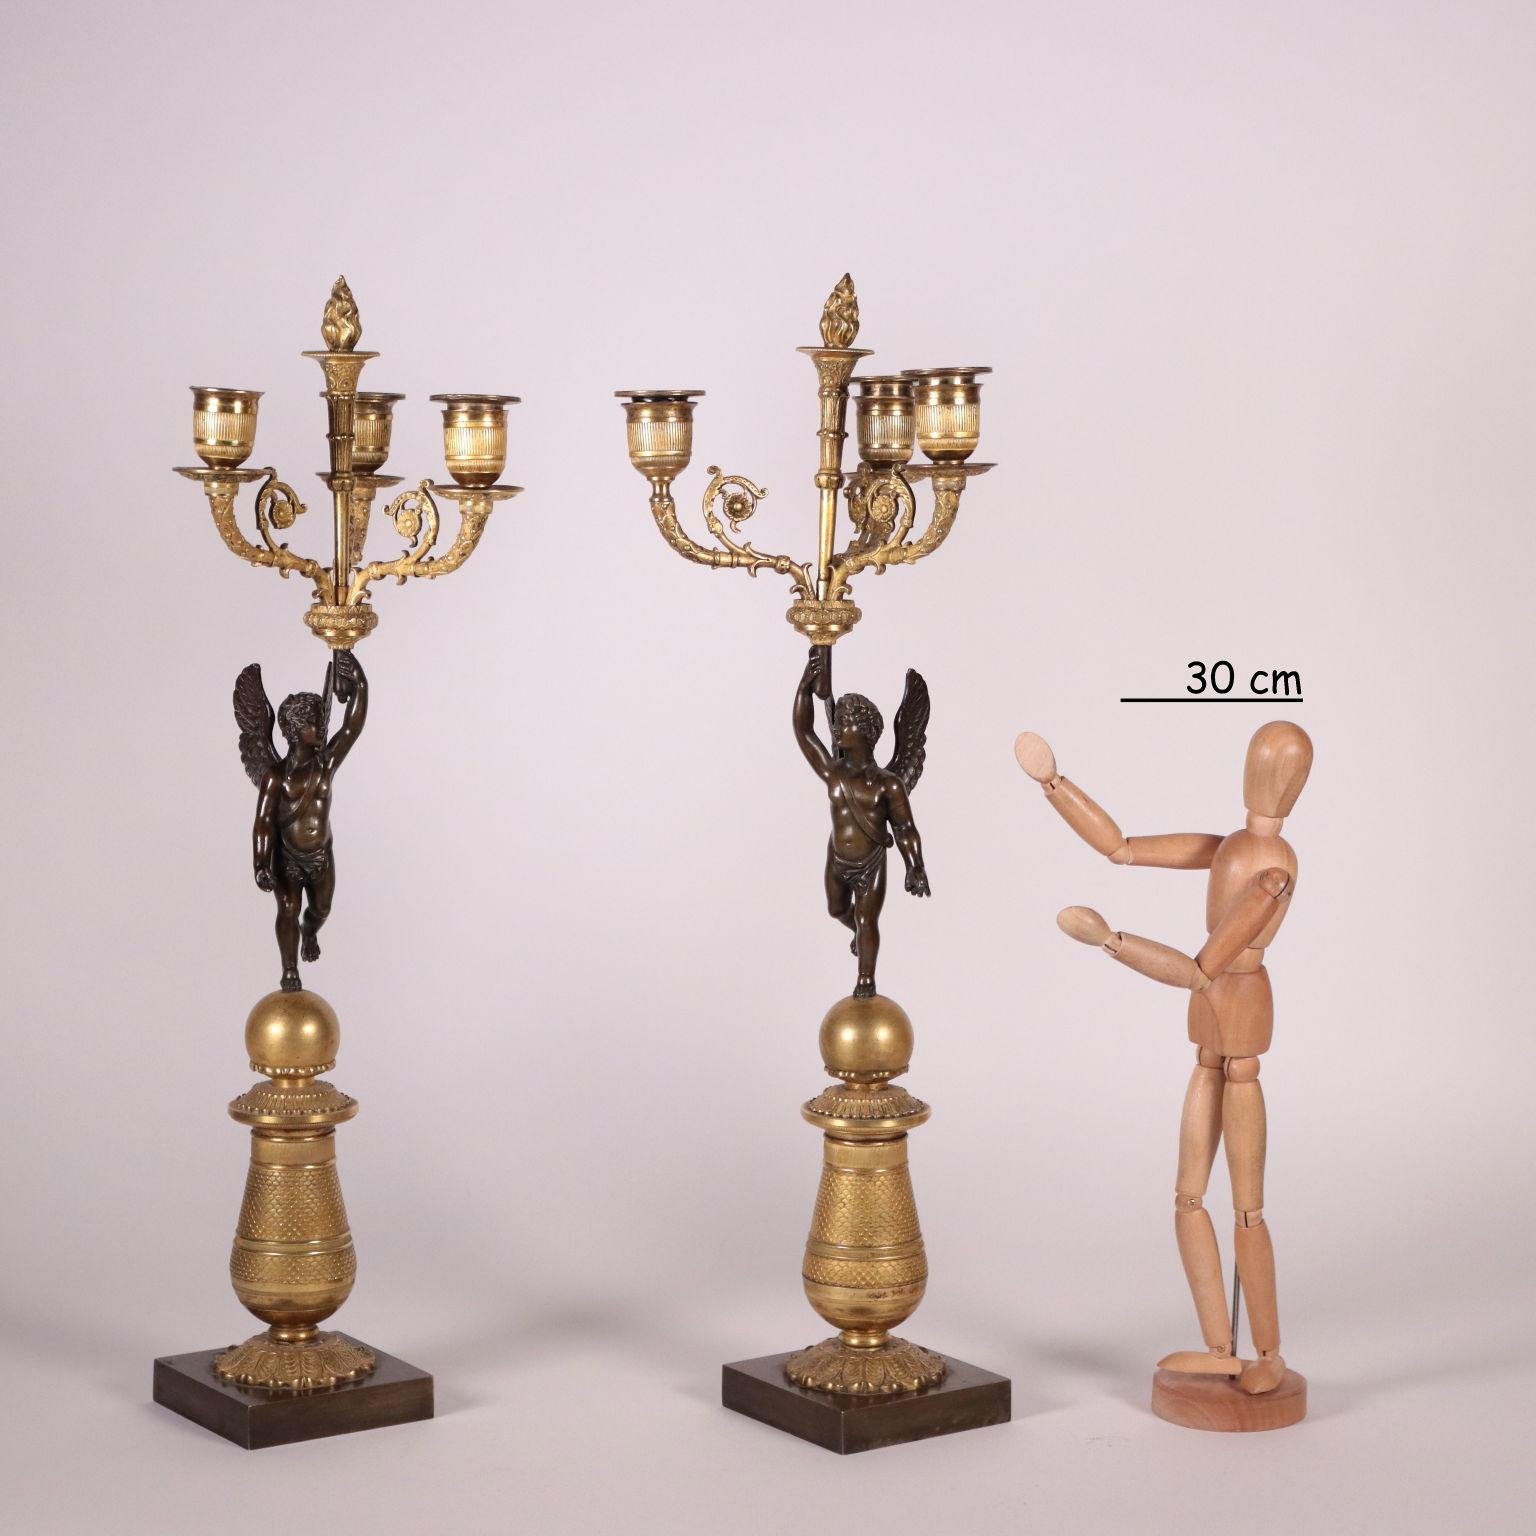 Pair of gilded bronze chandeliers with 3 lights. The arms are supported by a dark patined pronze putto that stands on a sphere and a vase-shaped plinth decorated with leafy elements and placed on a square base. Mercury gilding. 